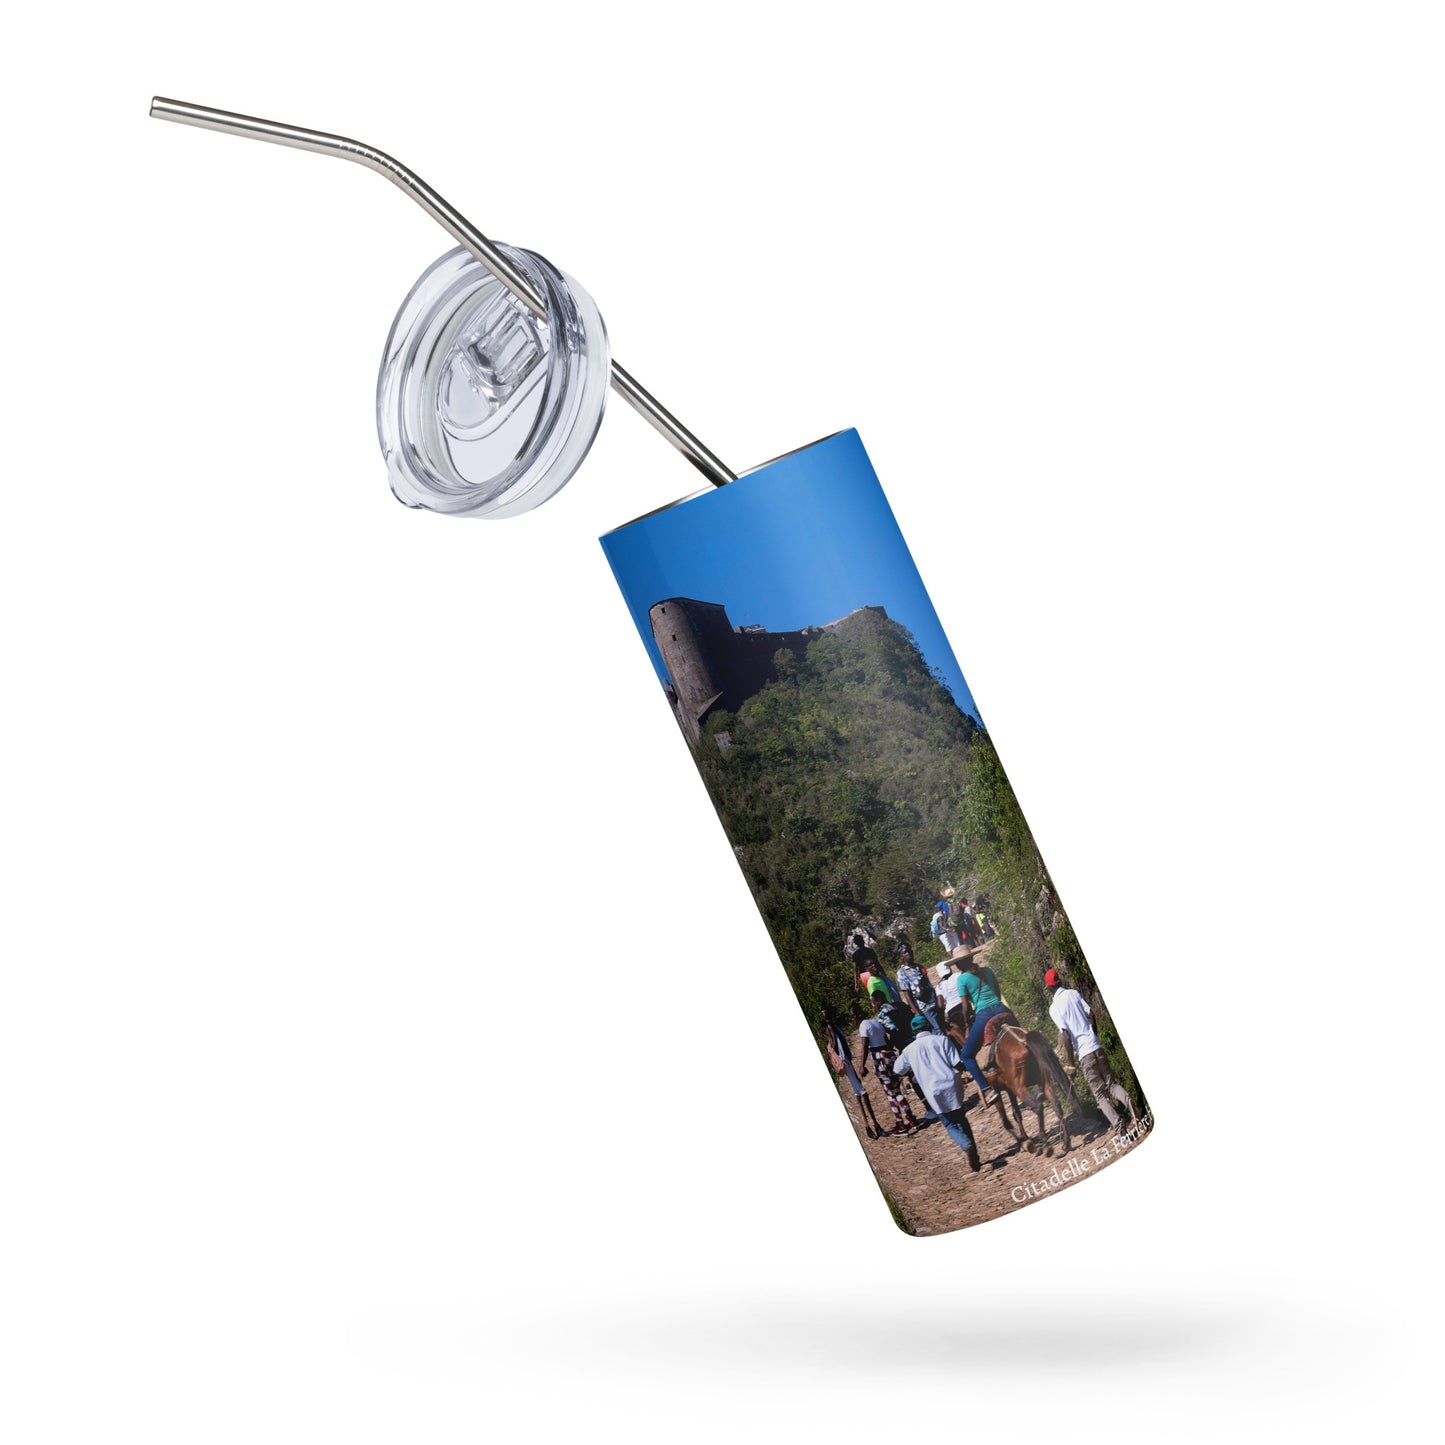 Stainless steel tumbler- Citadelle La Ferrière-Haïti-Tumbler-Goblet-Theo gallery expo-Theo photography